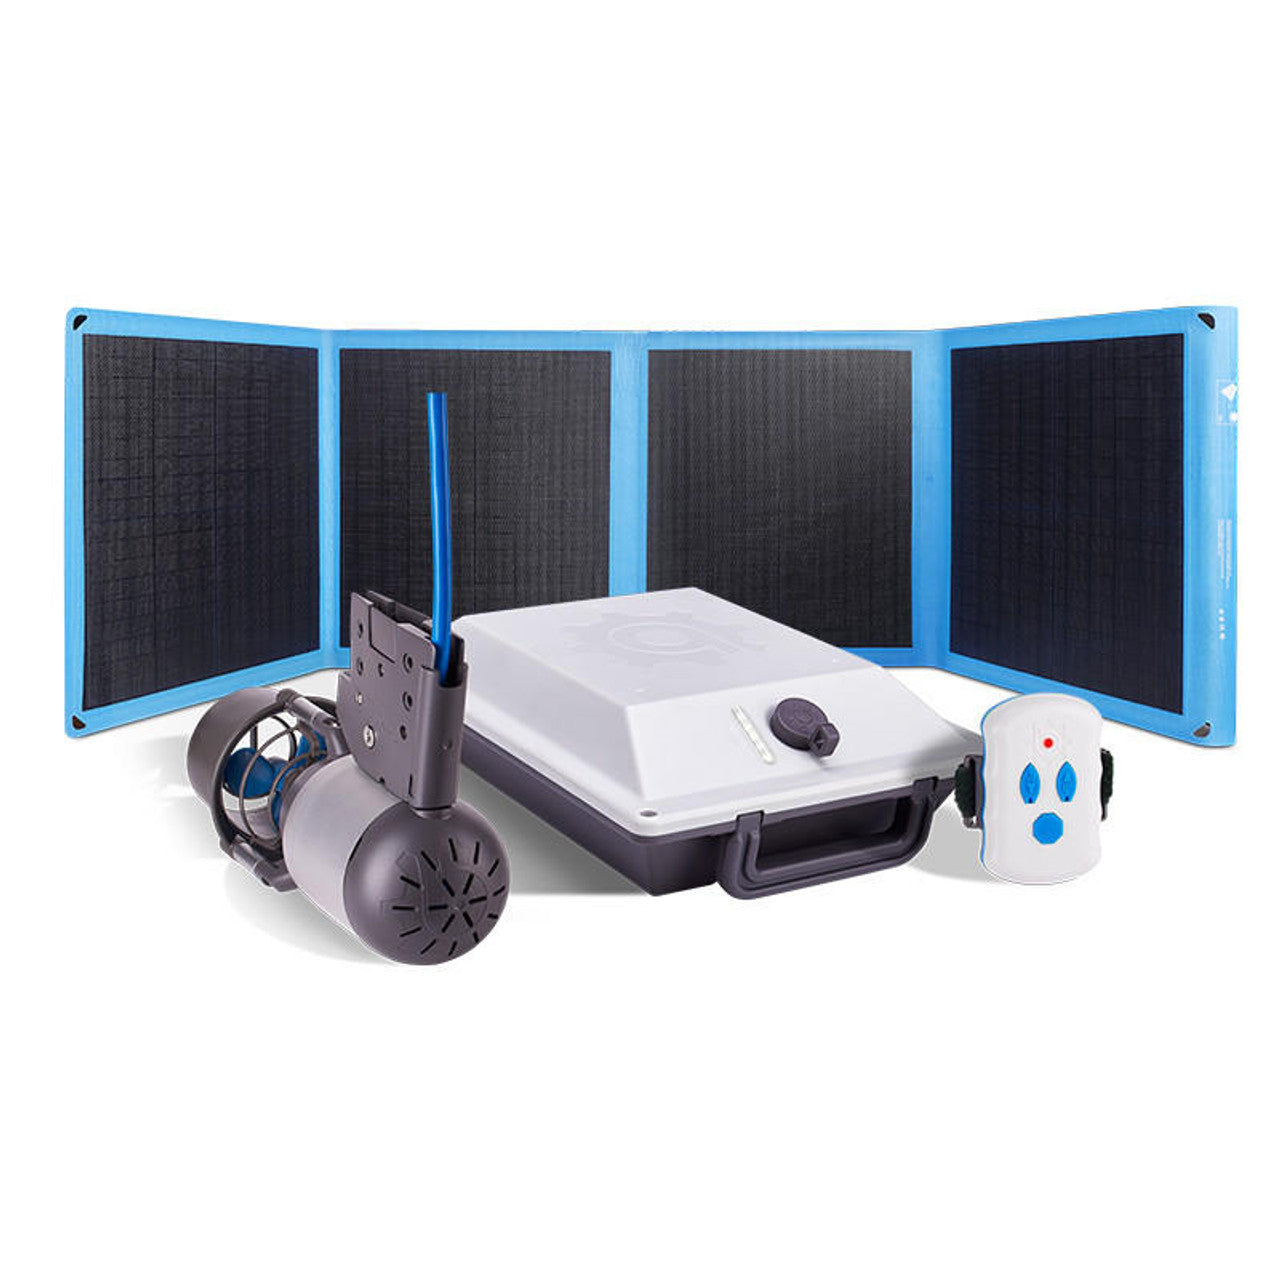 K-1 Outboard Kit with SUN80 Solar Panel Only